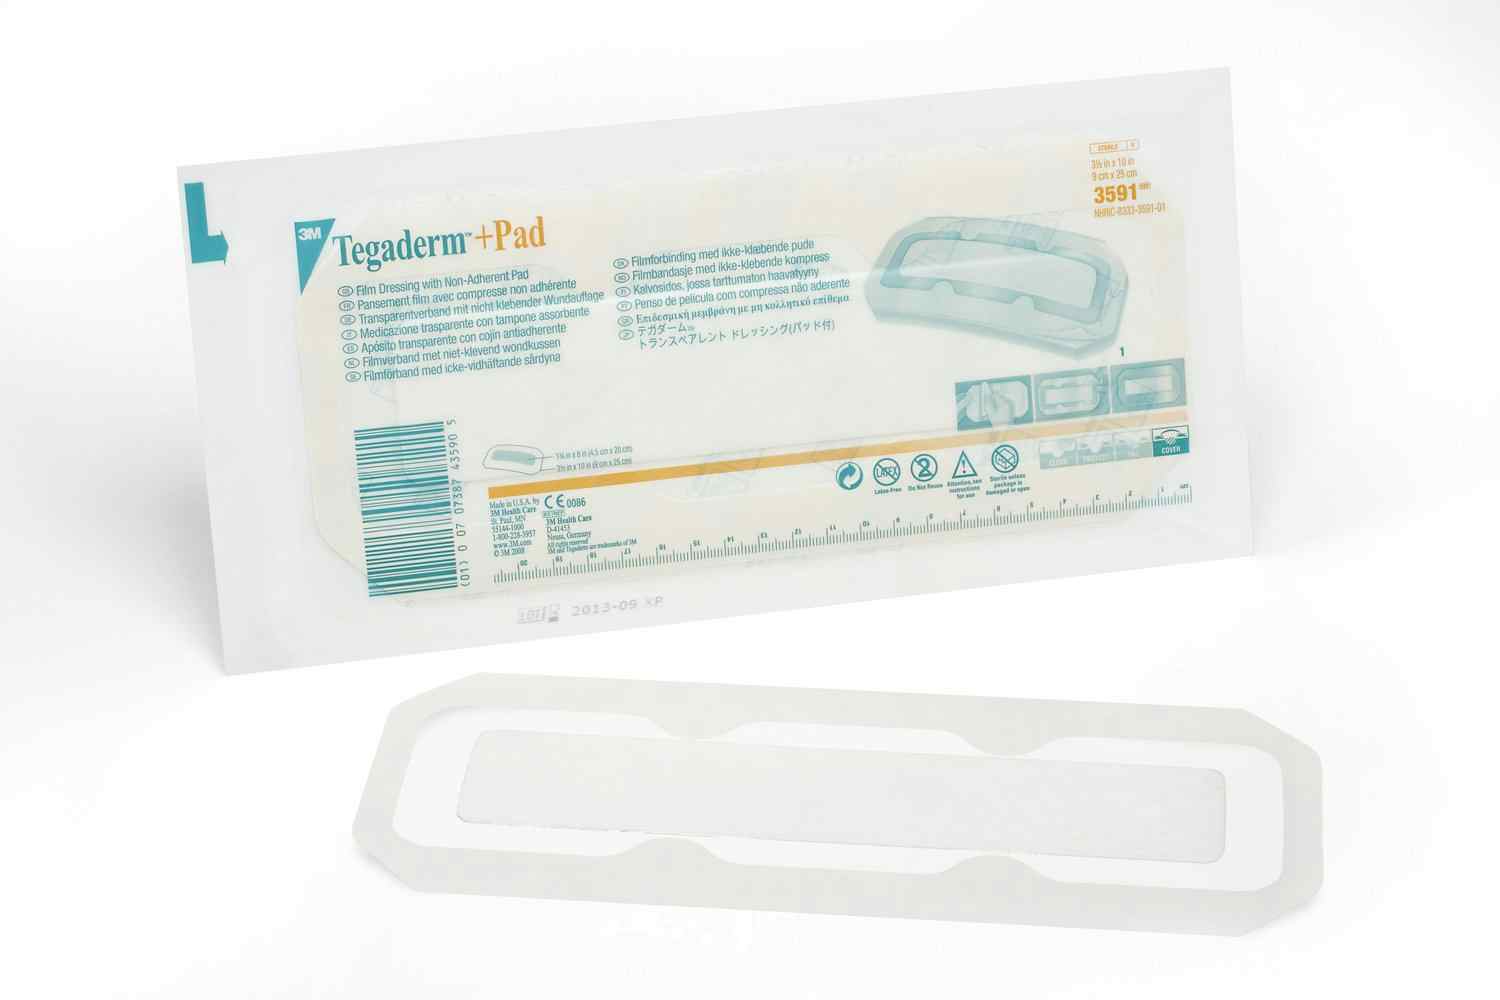 3M Tegaderm +Pad Film Dressing with Non-Adherent Pads, 3.5 X 10", 3591, Box of 25